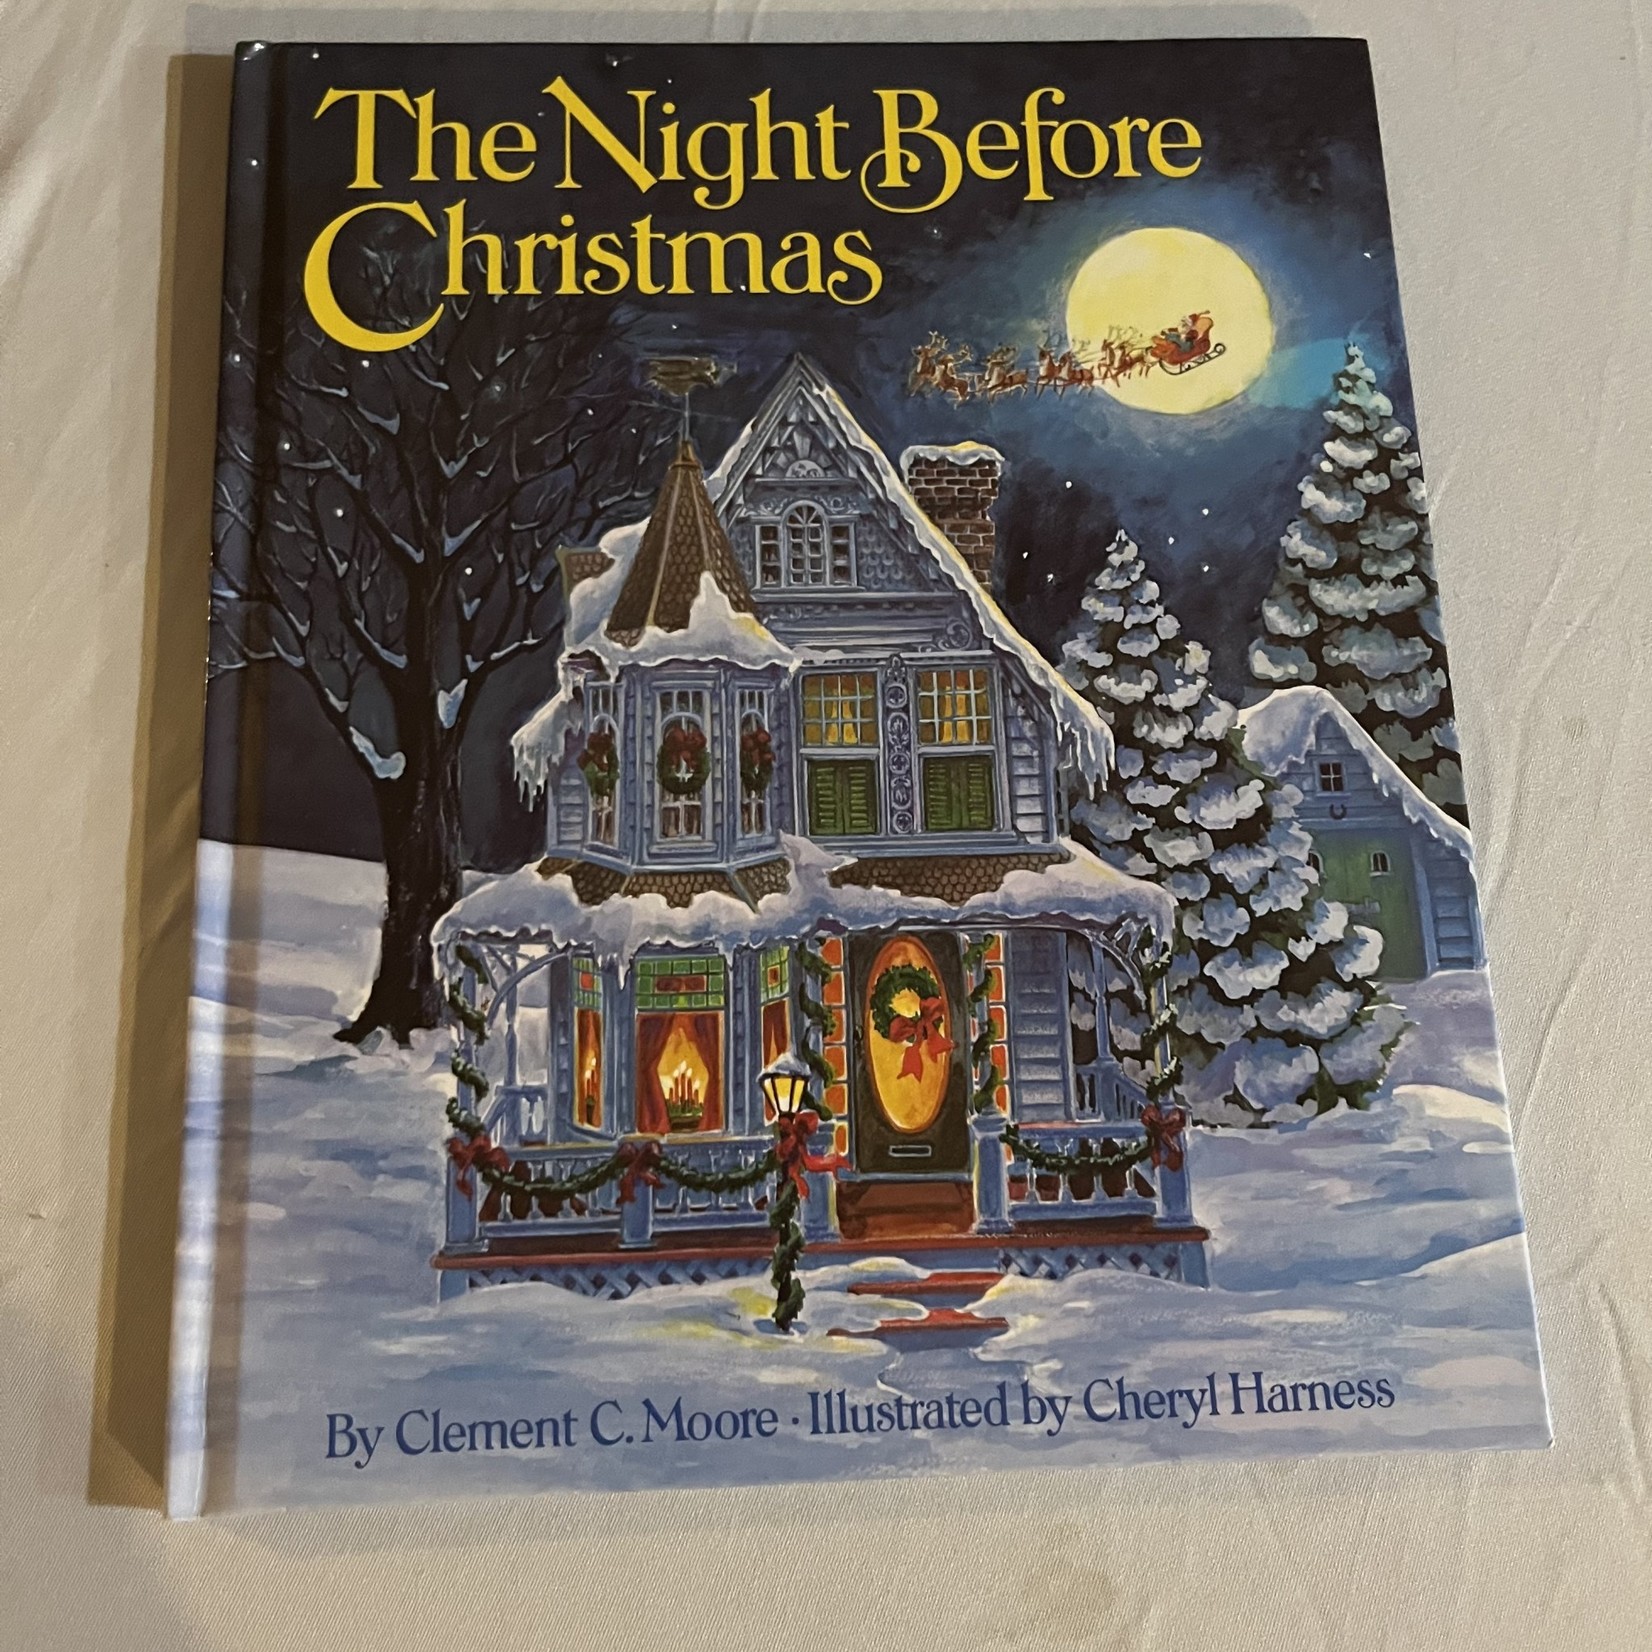 The Night Before Christmas - Illustrated by Cheryl Harness